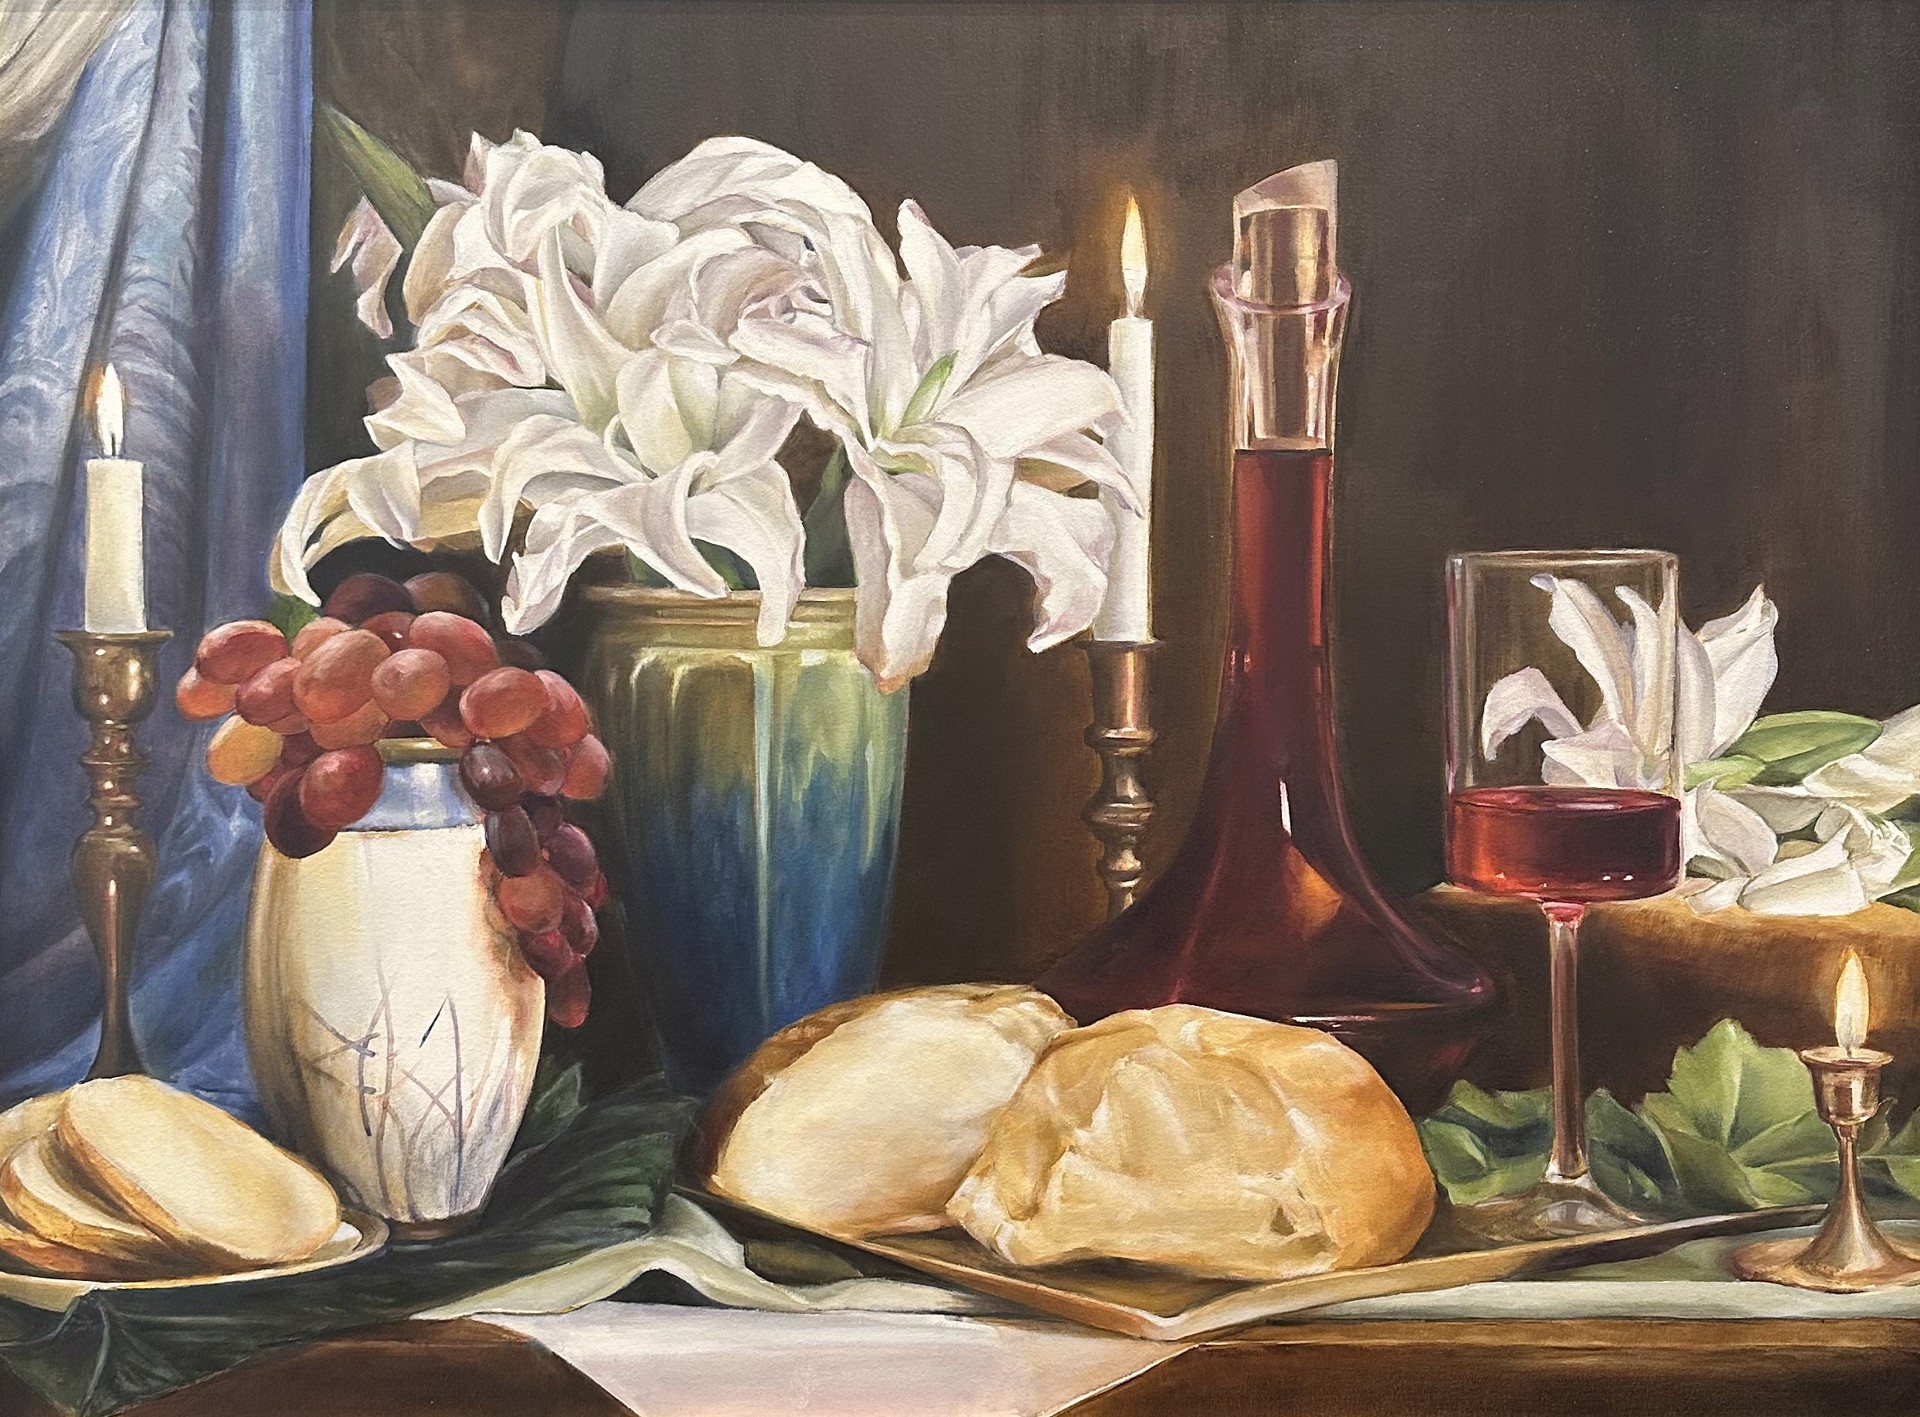 The Last Supper by Stephanie Neely